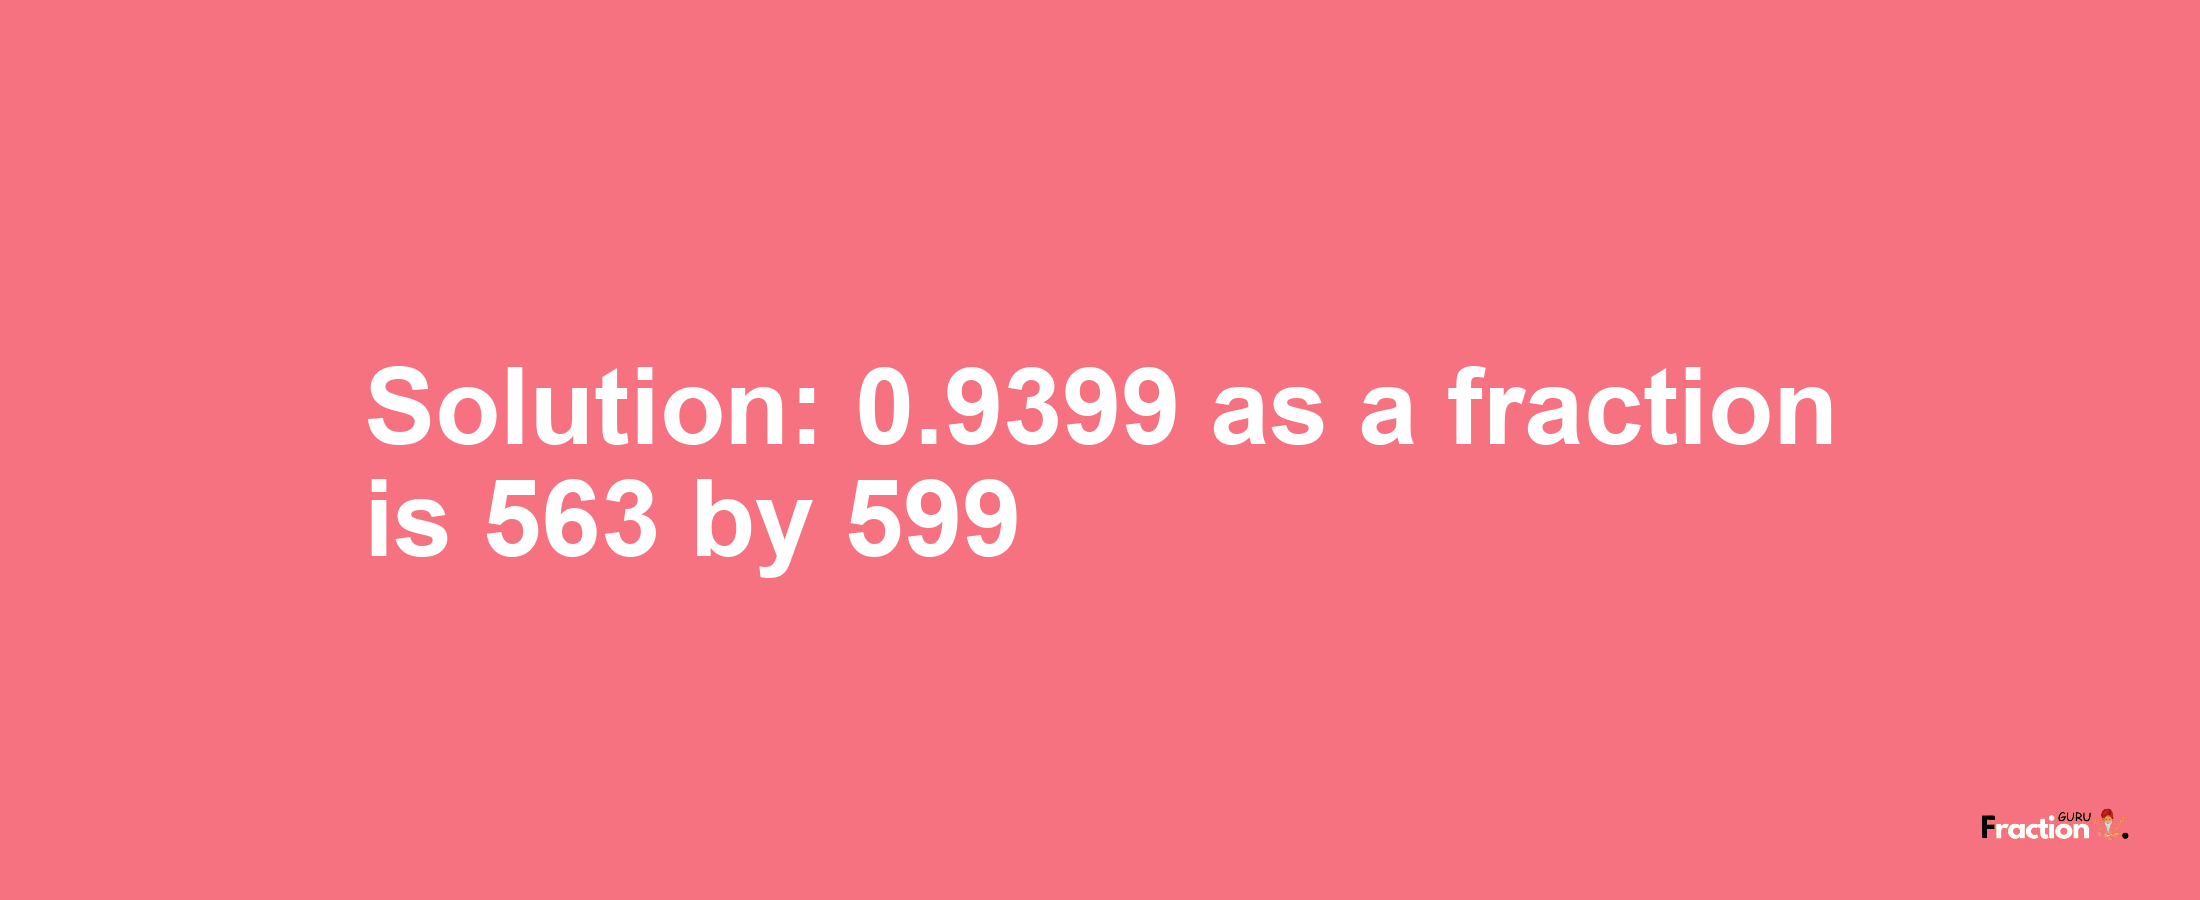 Solution:0.9399 as a fraction is 563/599